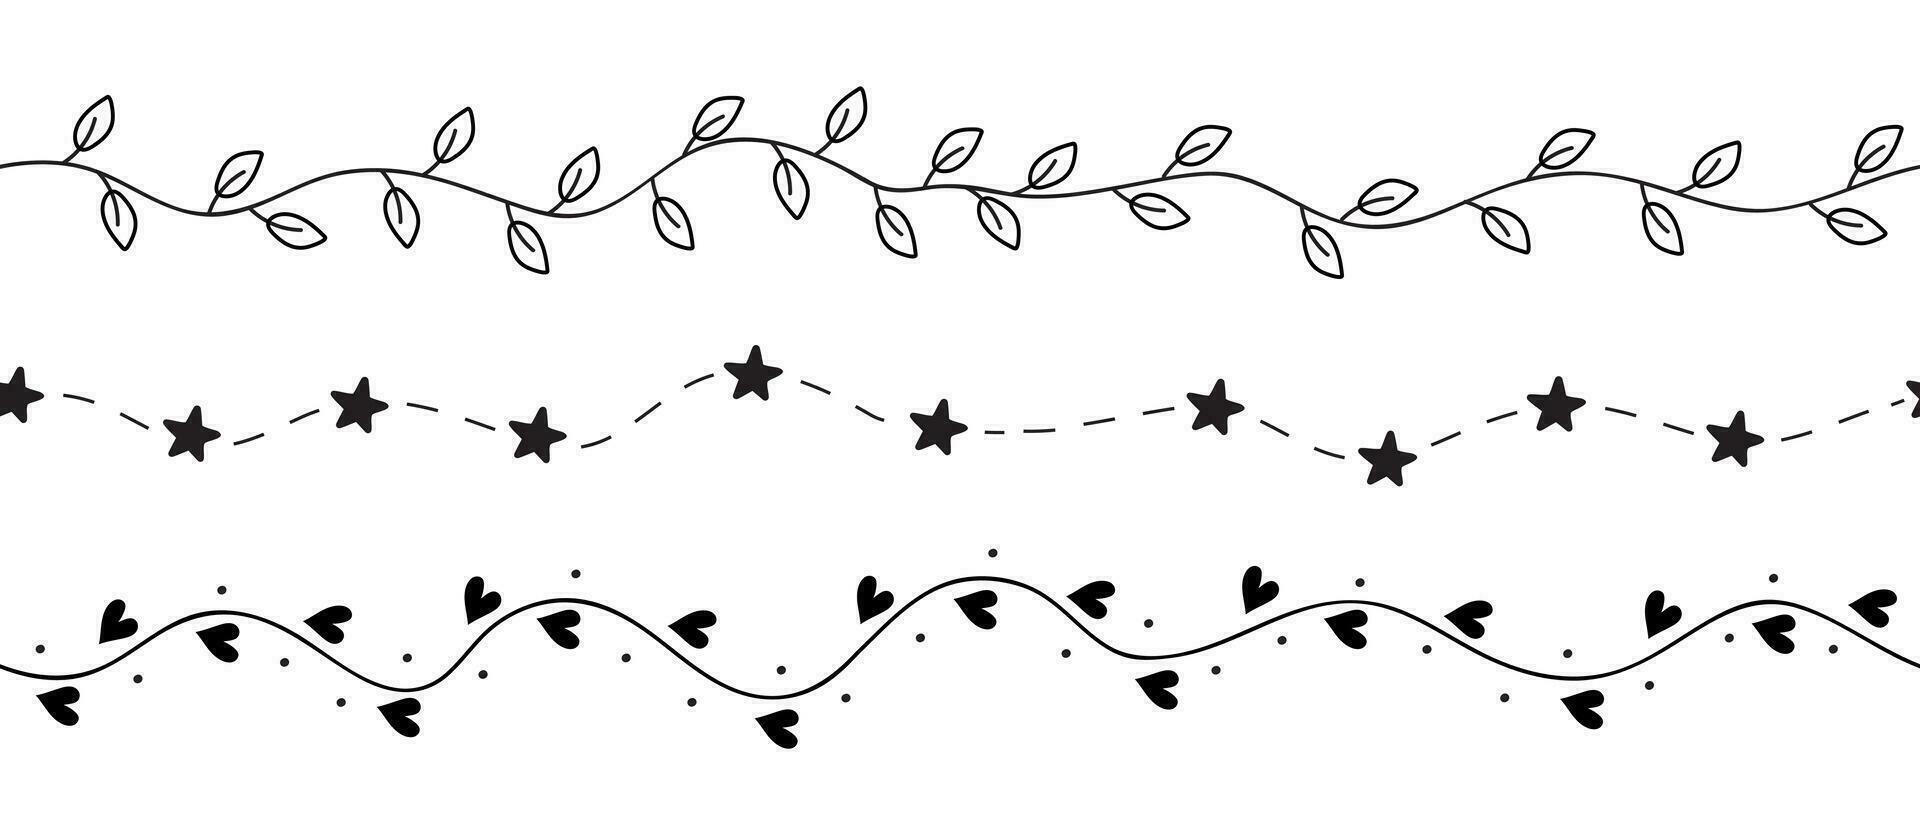 Hearts, stars and leaves seamless brush. Hand drawn doodle vector